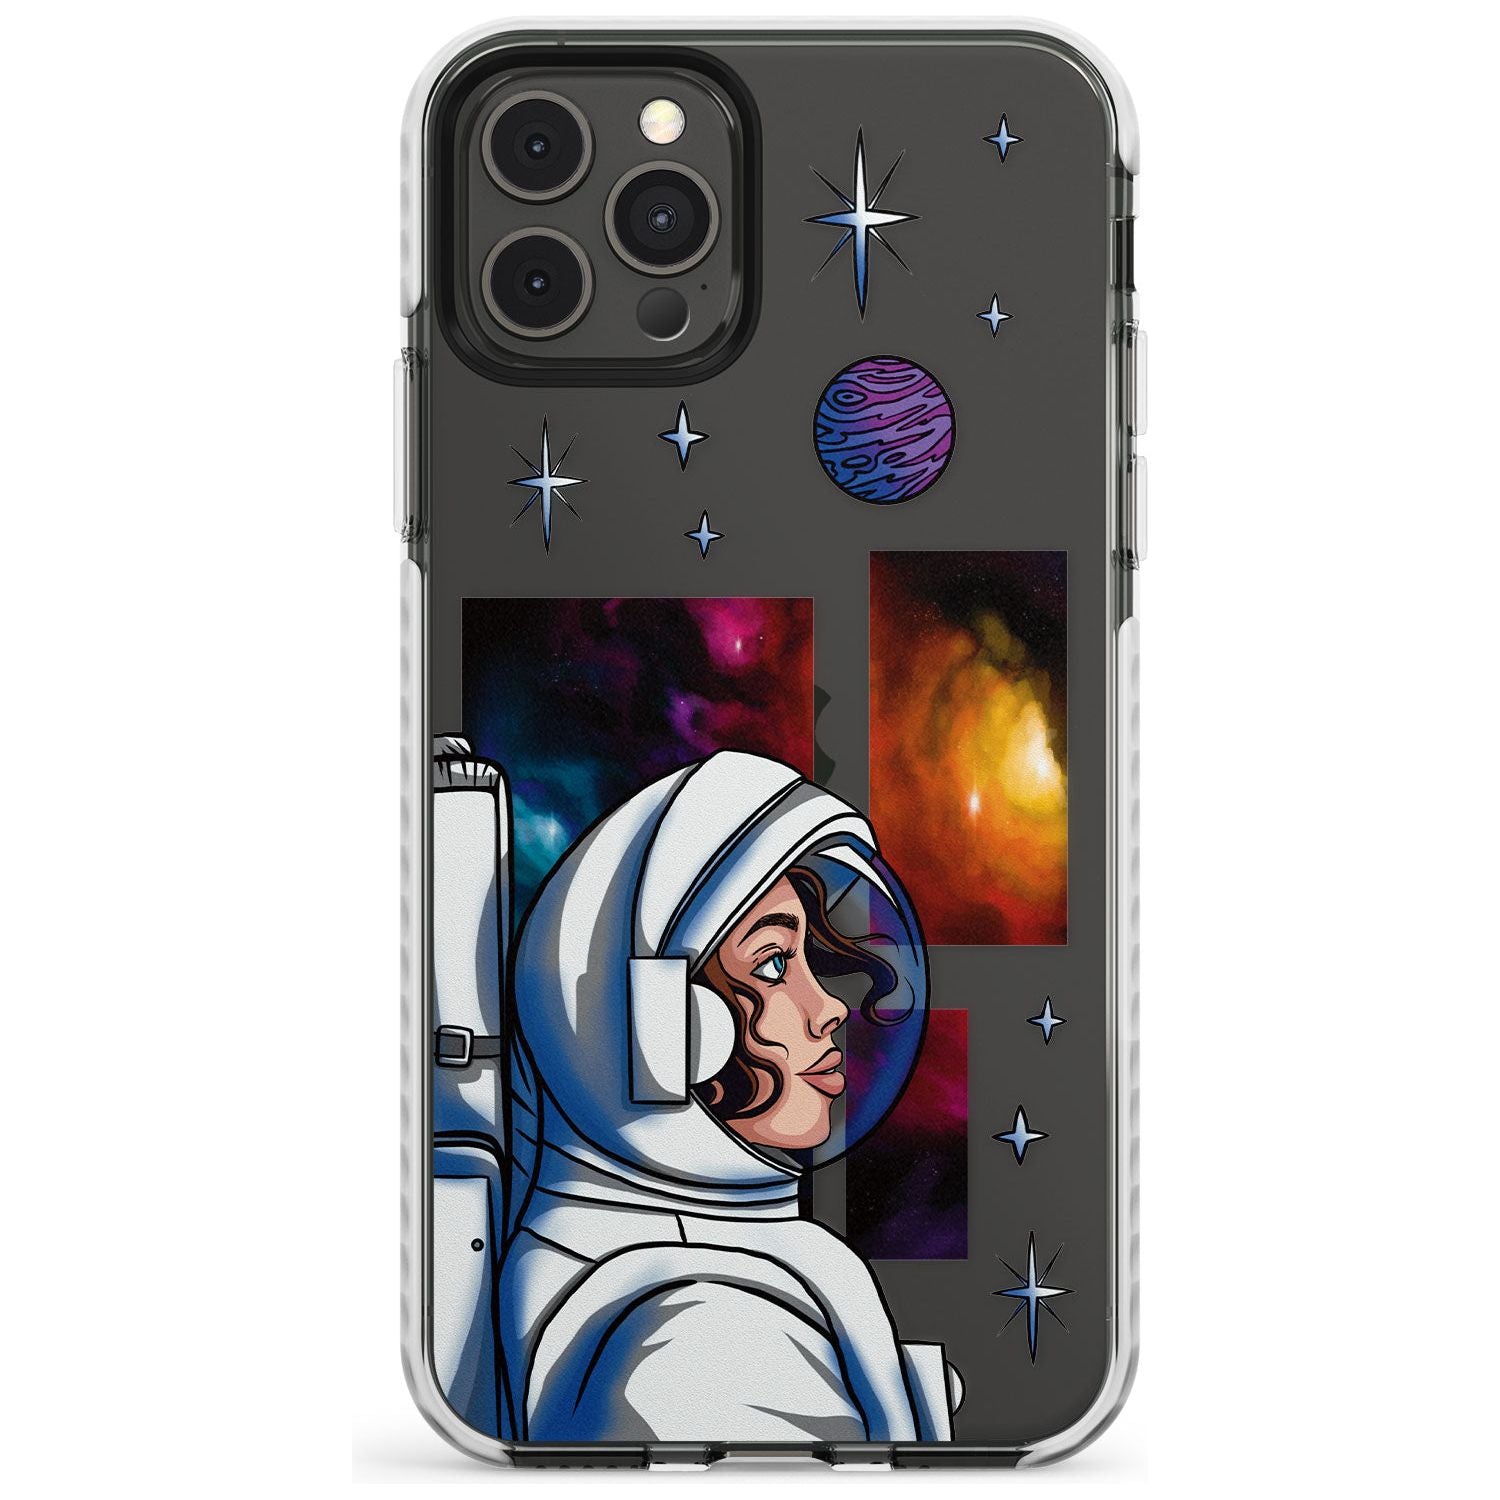 COSMIC AMBITION Slim TPU Phone Case for iPhone 11 Pro Max